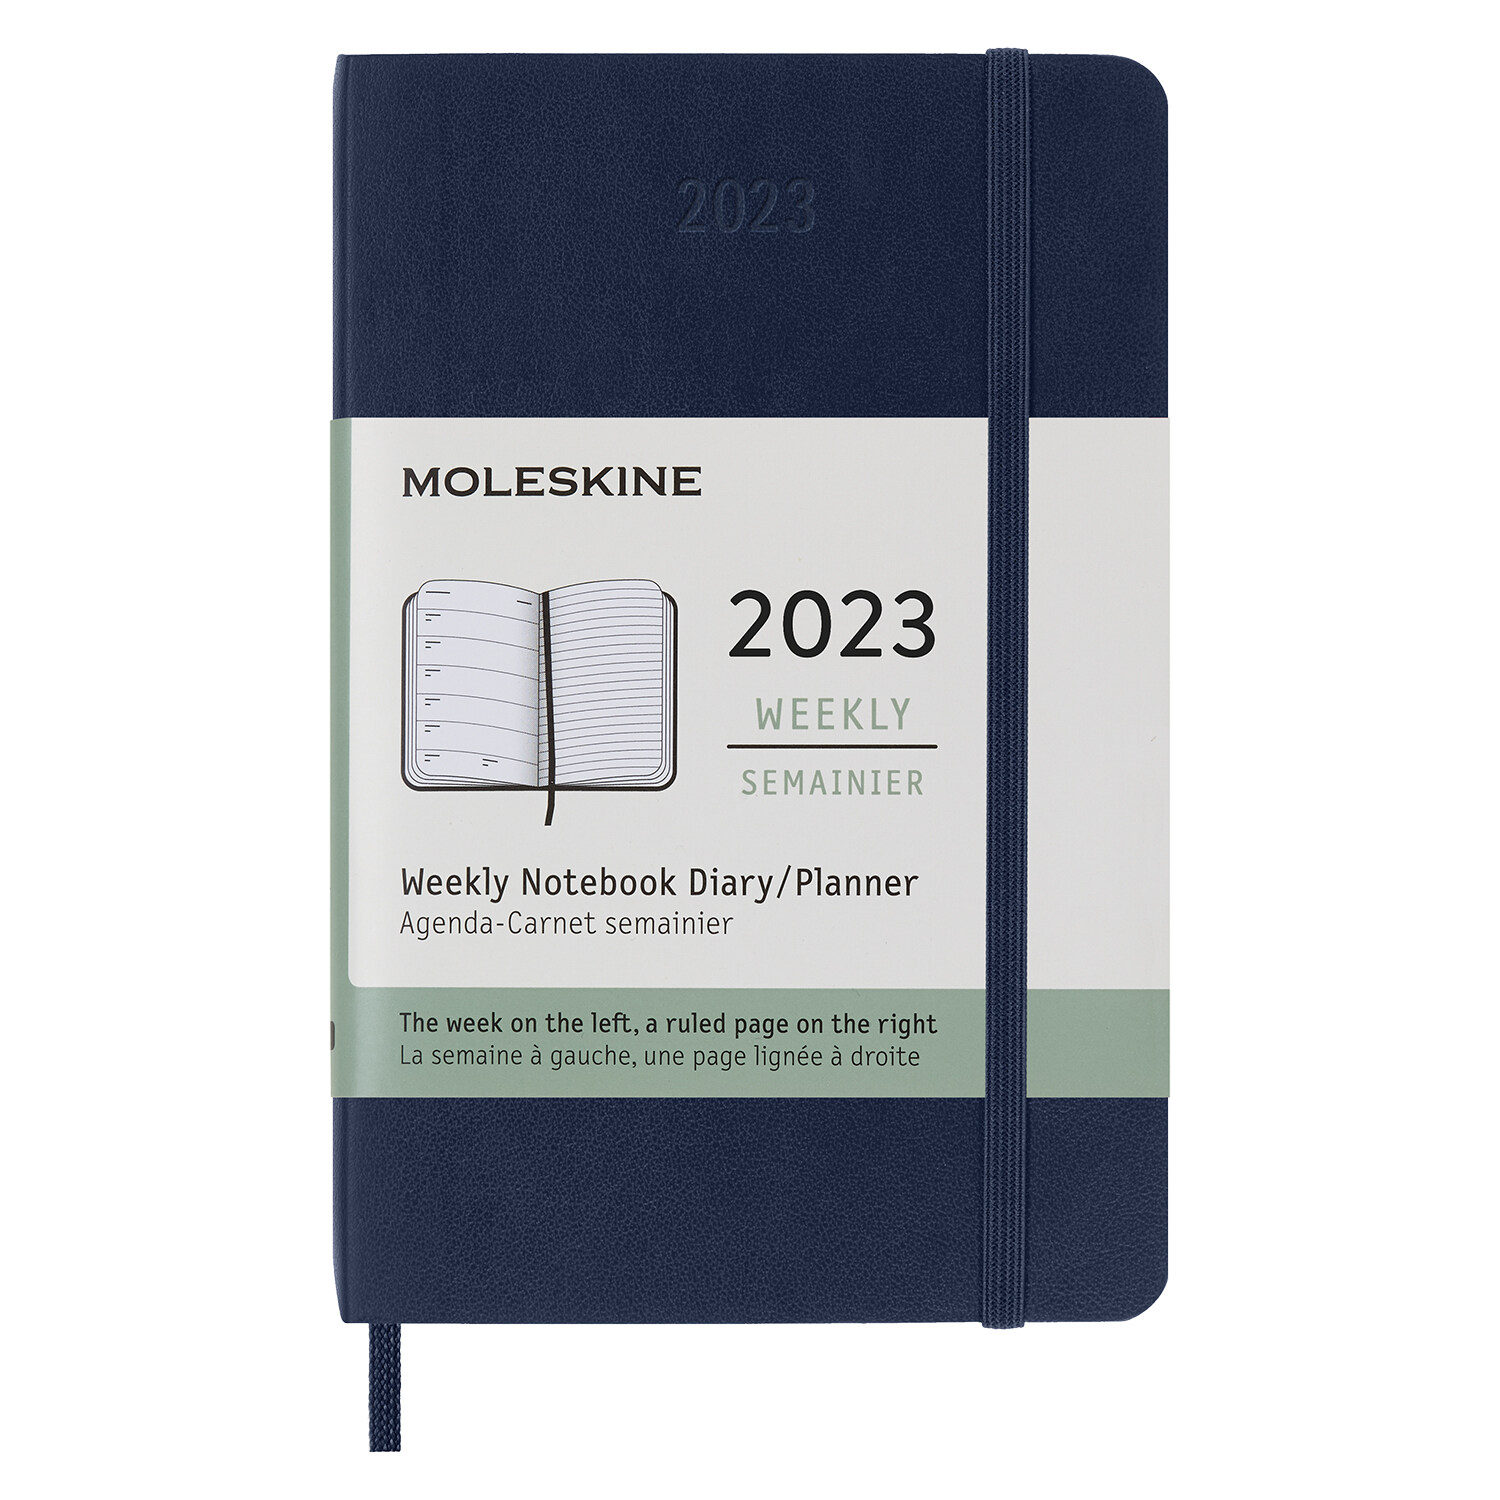 Moleskine 2023 Weekly Notebook Planner, 12m, Pocket, Saphire Blue, Soft Cover (3.5 X 5.5) (Other)